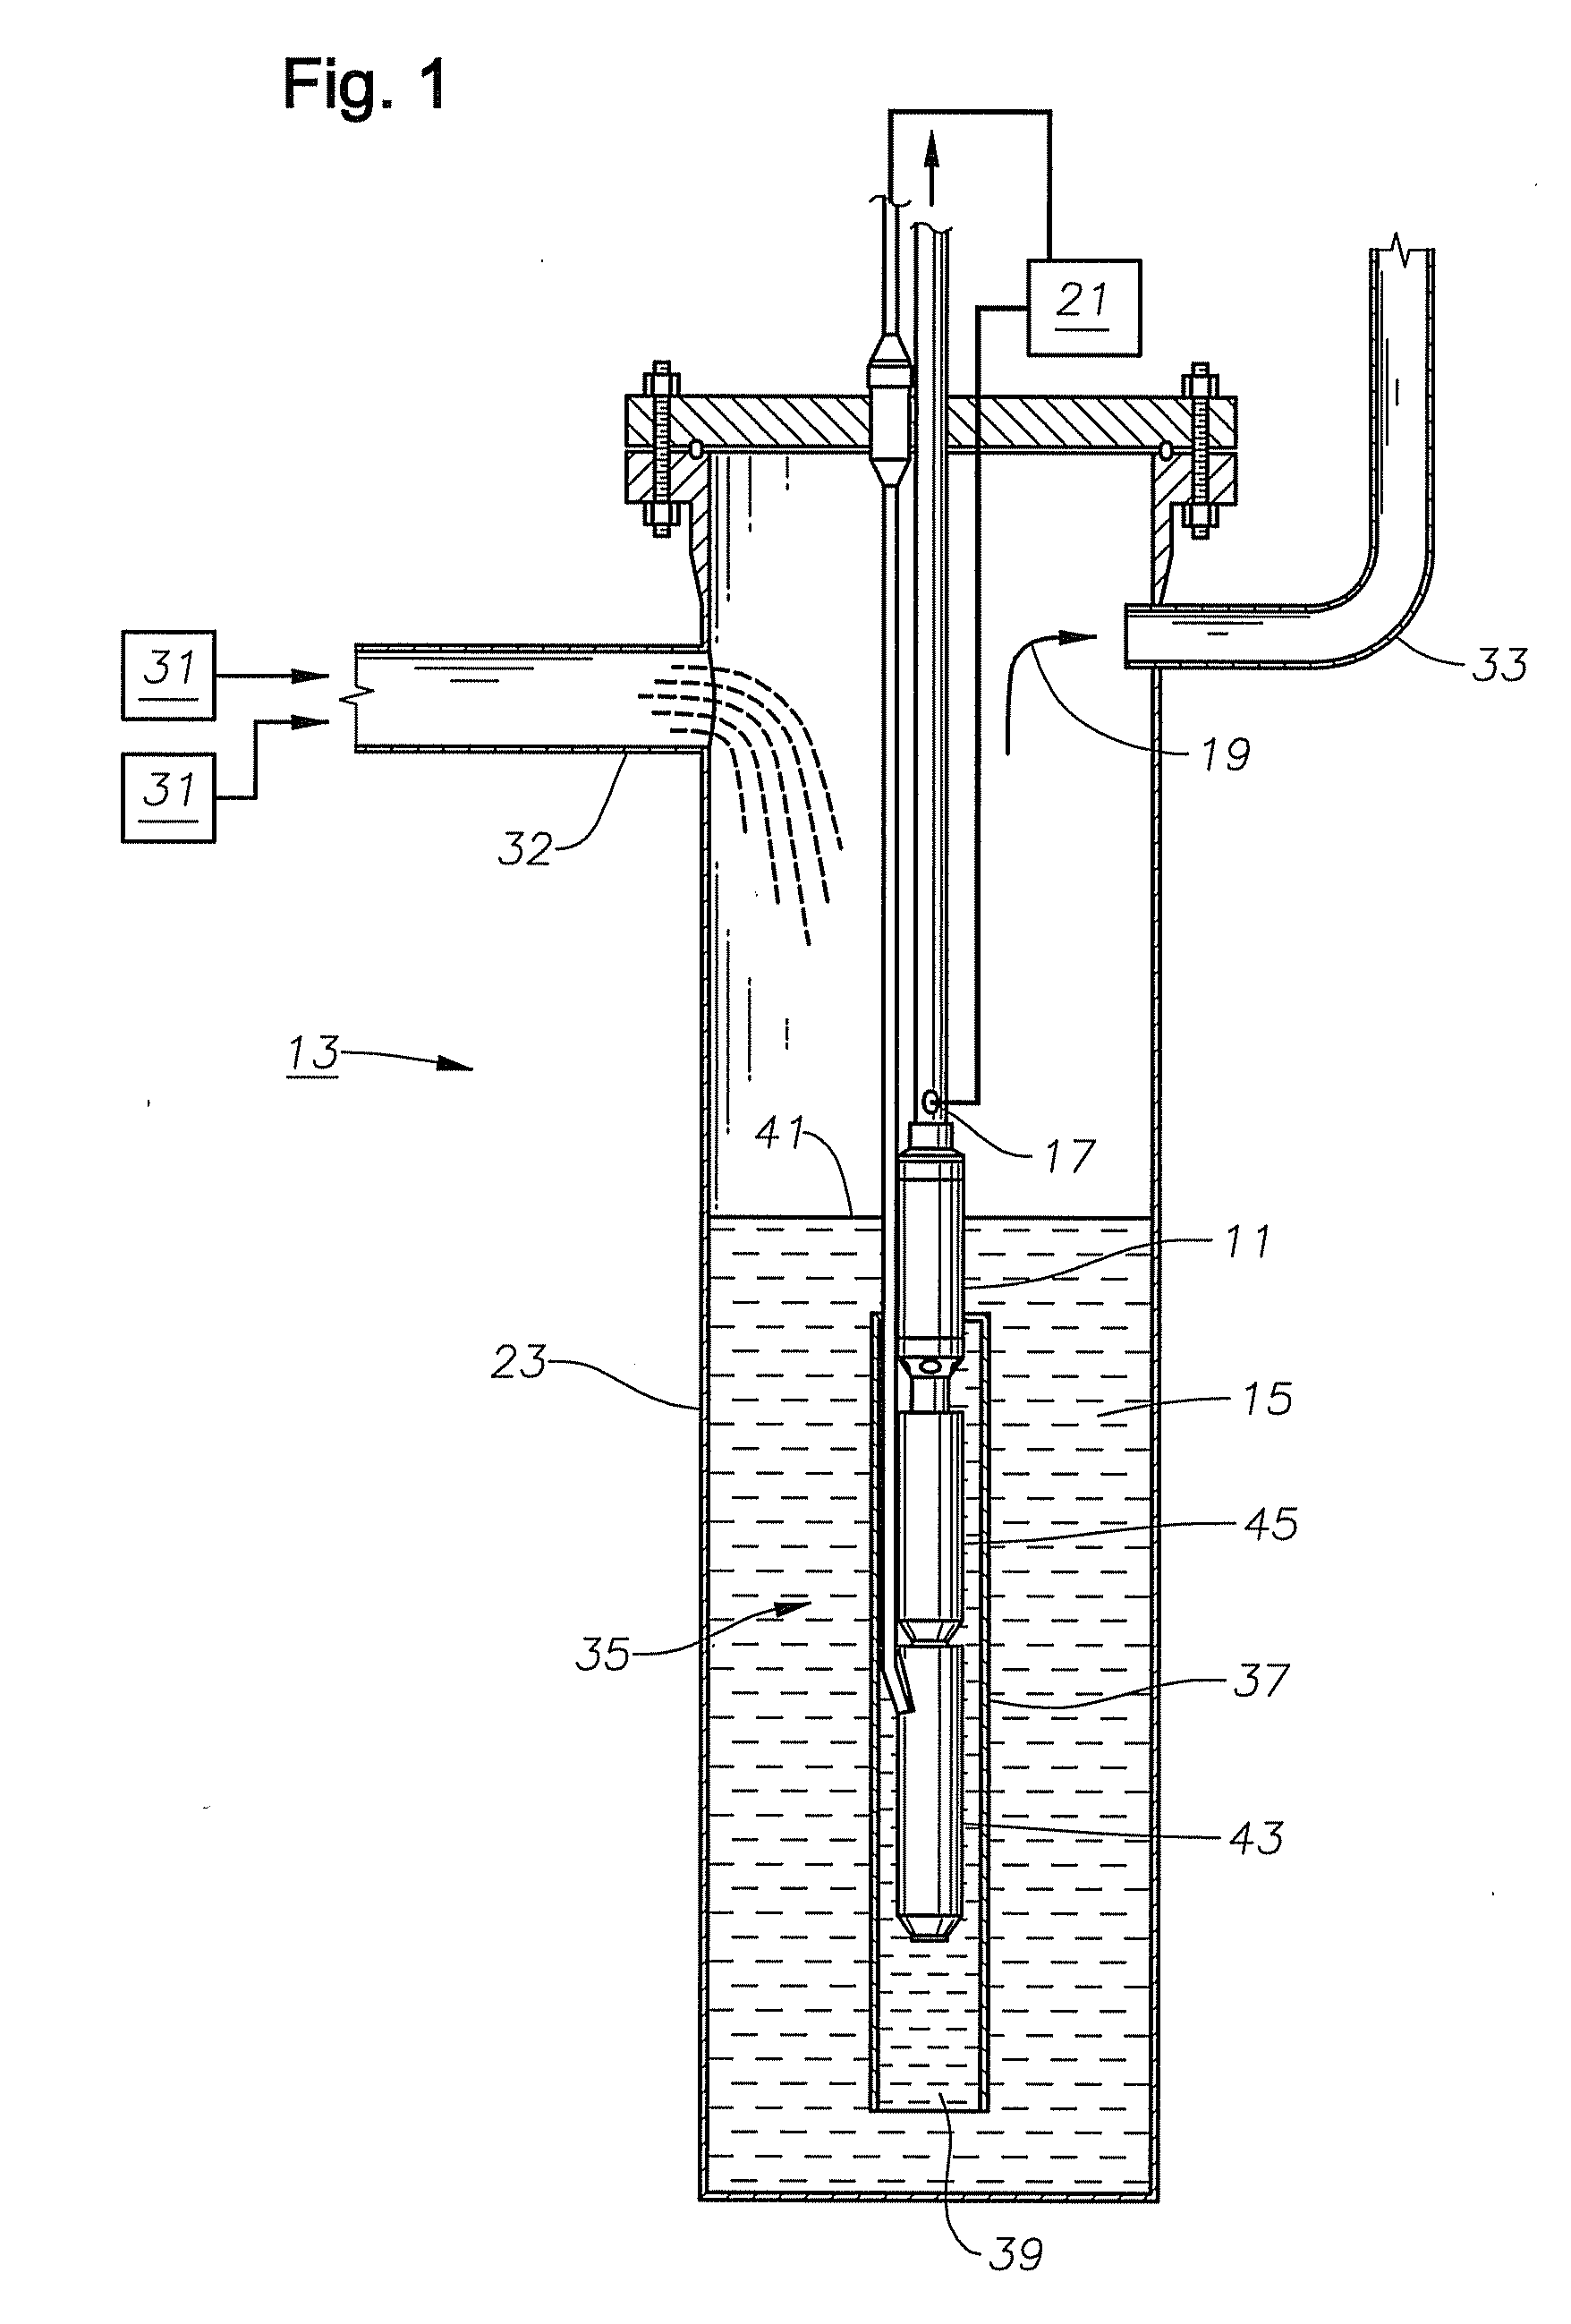 System, method and apparatus for controlling the flow rate of an electrical submersible pump based on fluid density